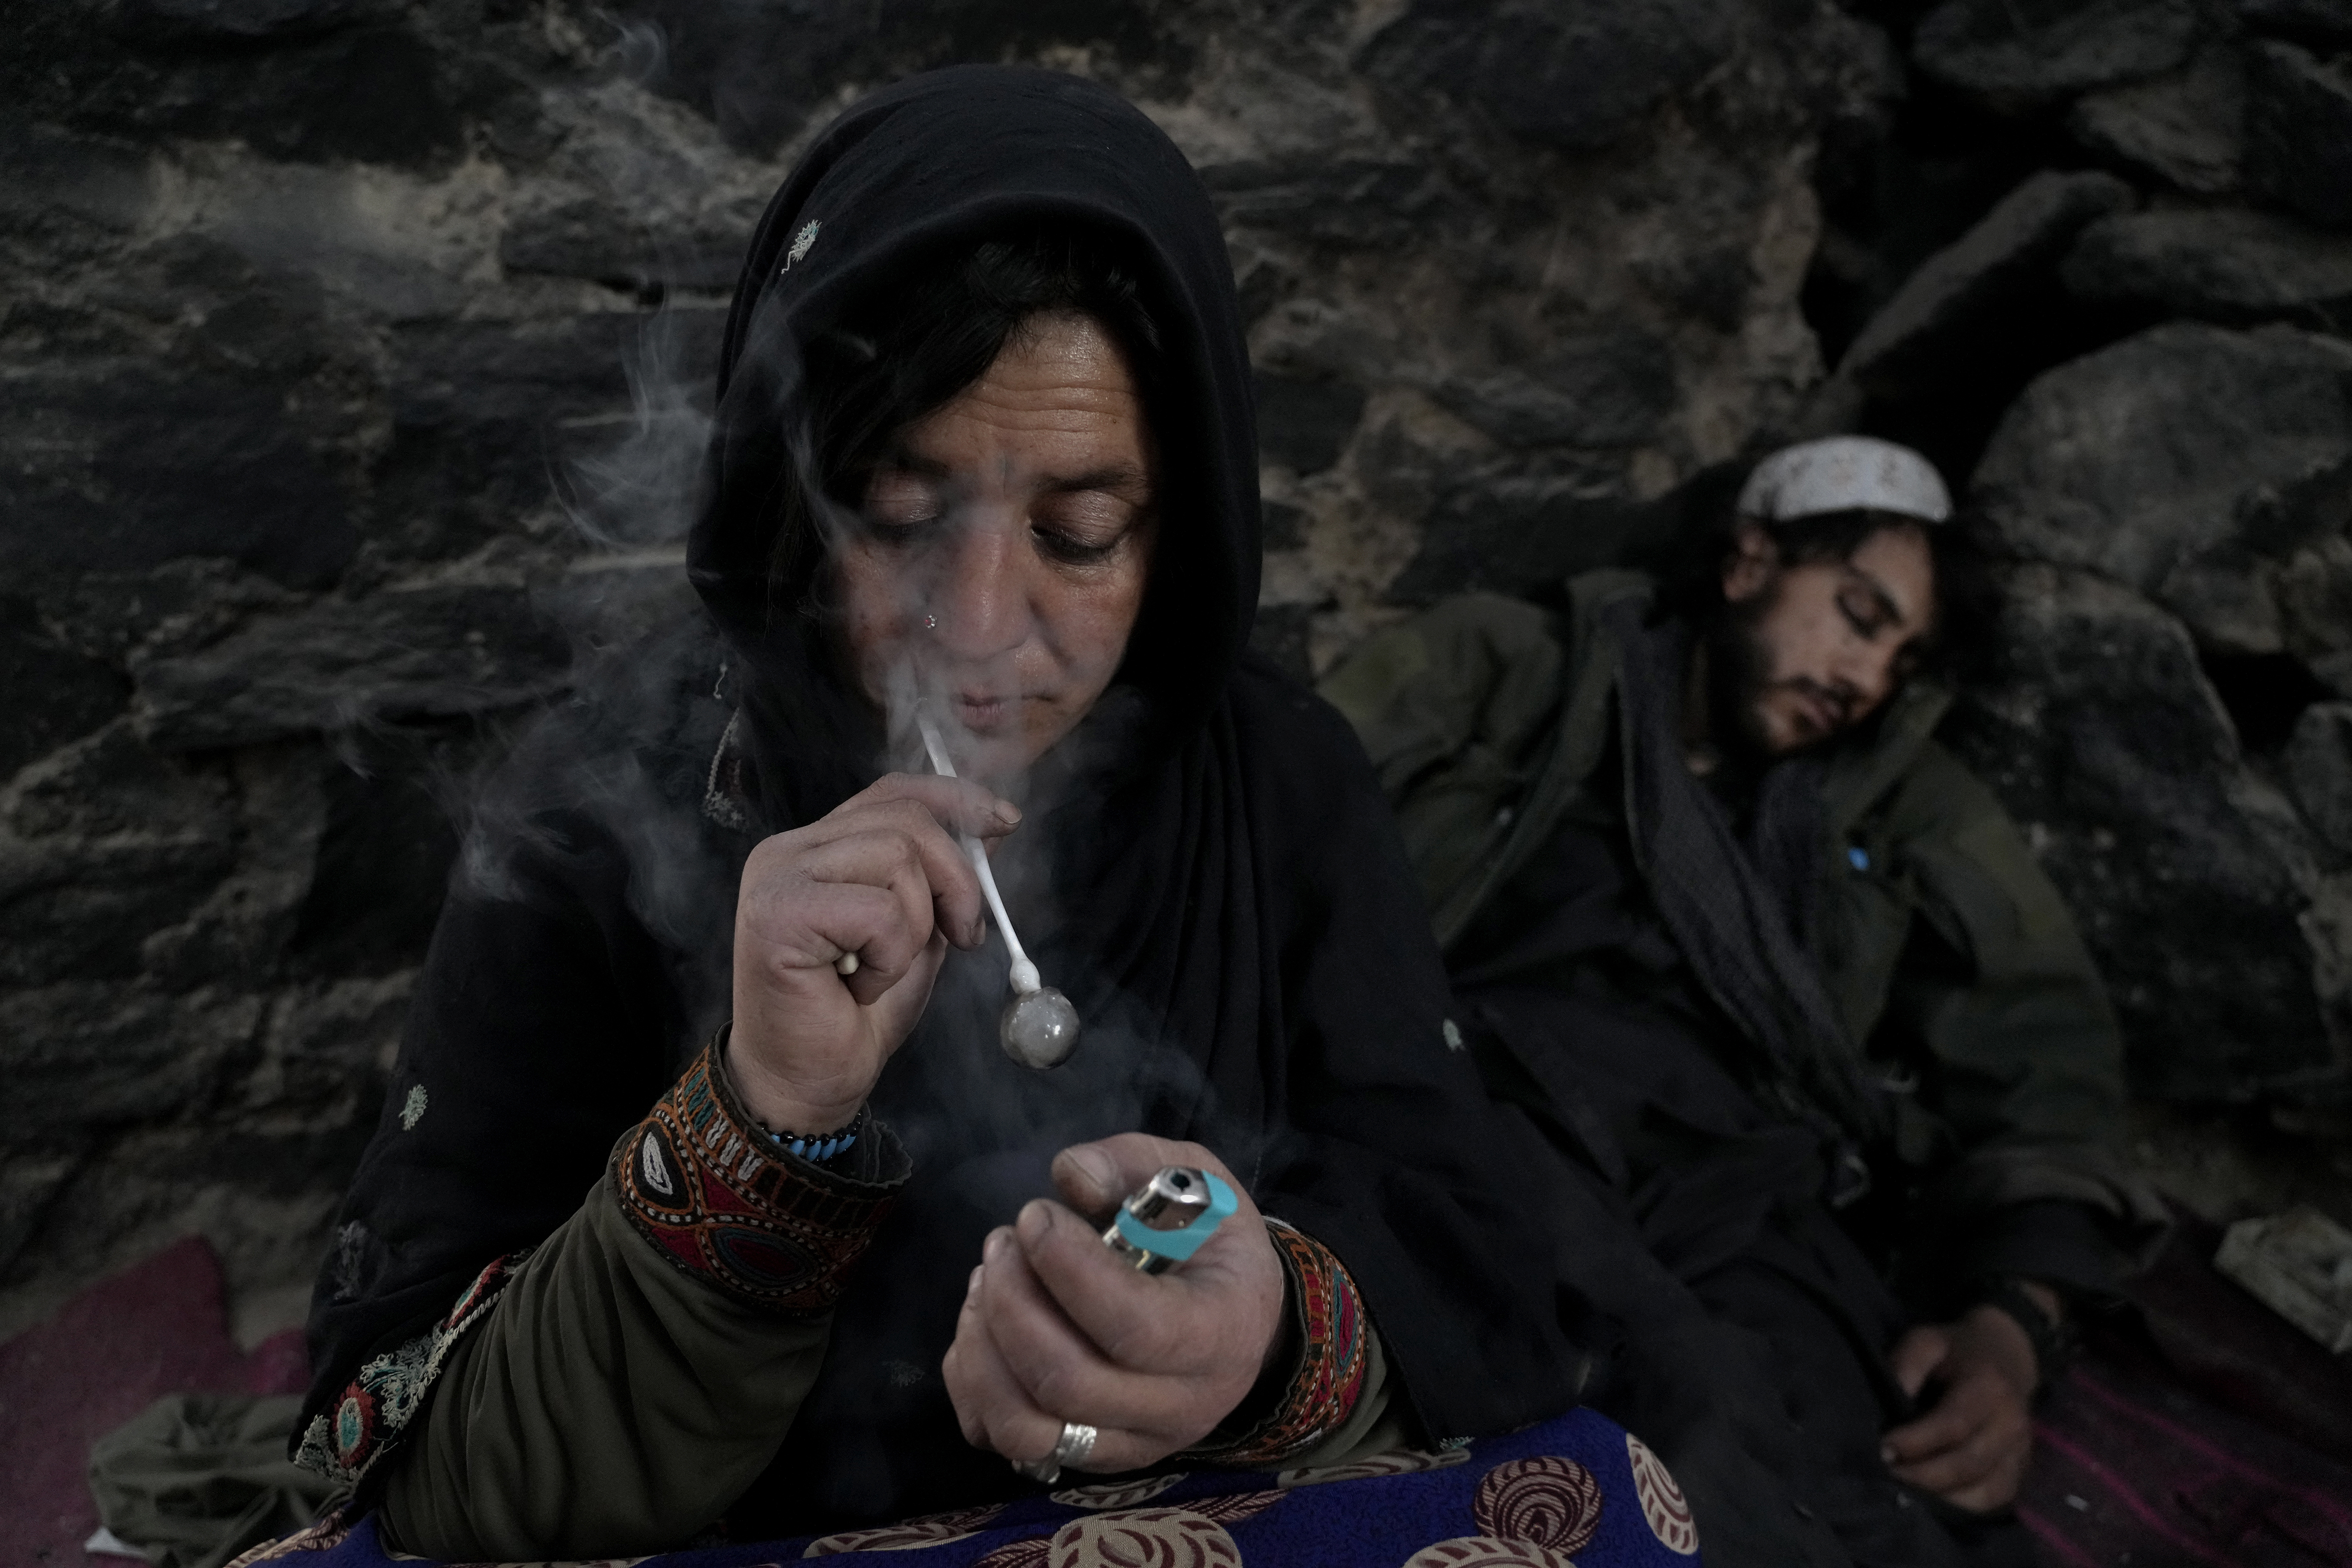 An Afghan drug addict smokes heroin on the edge of a hill in the city of Kabul, Afghanistan,Thursday, June 16, 2022. Drug addiction has long been a problem in Afghanistan, the world’s biggest producer of opium and heroin. The ranks of the addicted have been fueled by persistent poverty and by decades of war that left few families unscarred. (AP Photo/Ebrahim Noroozi)